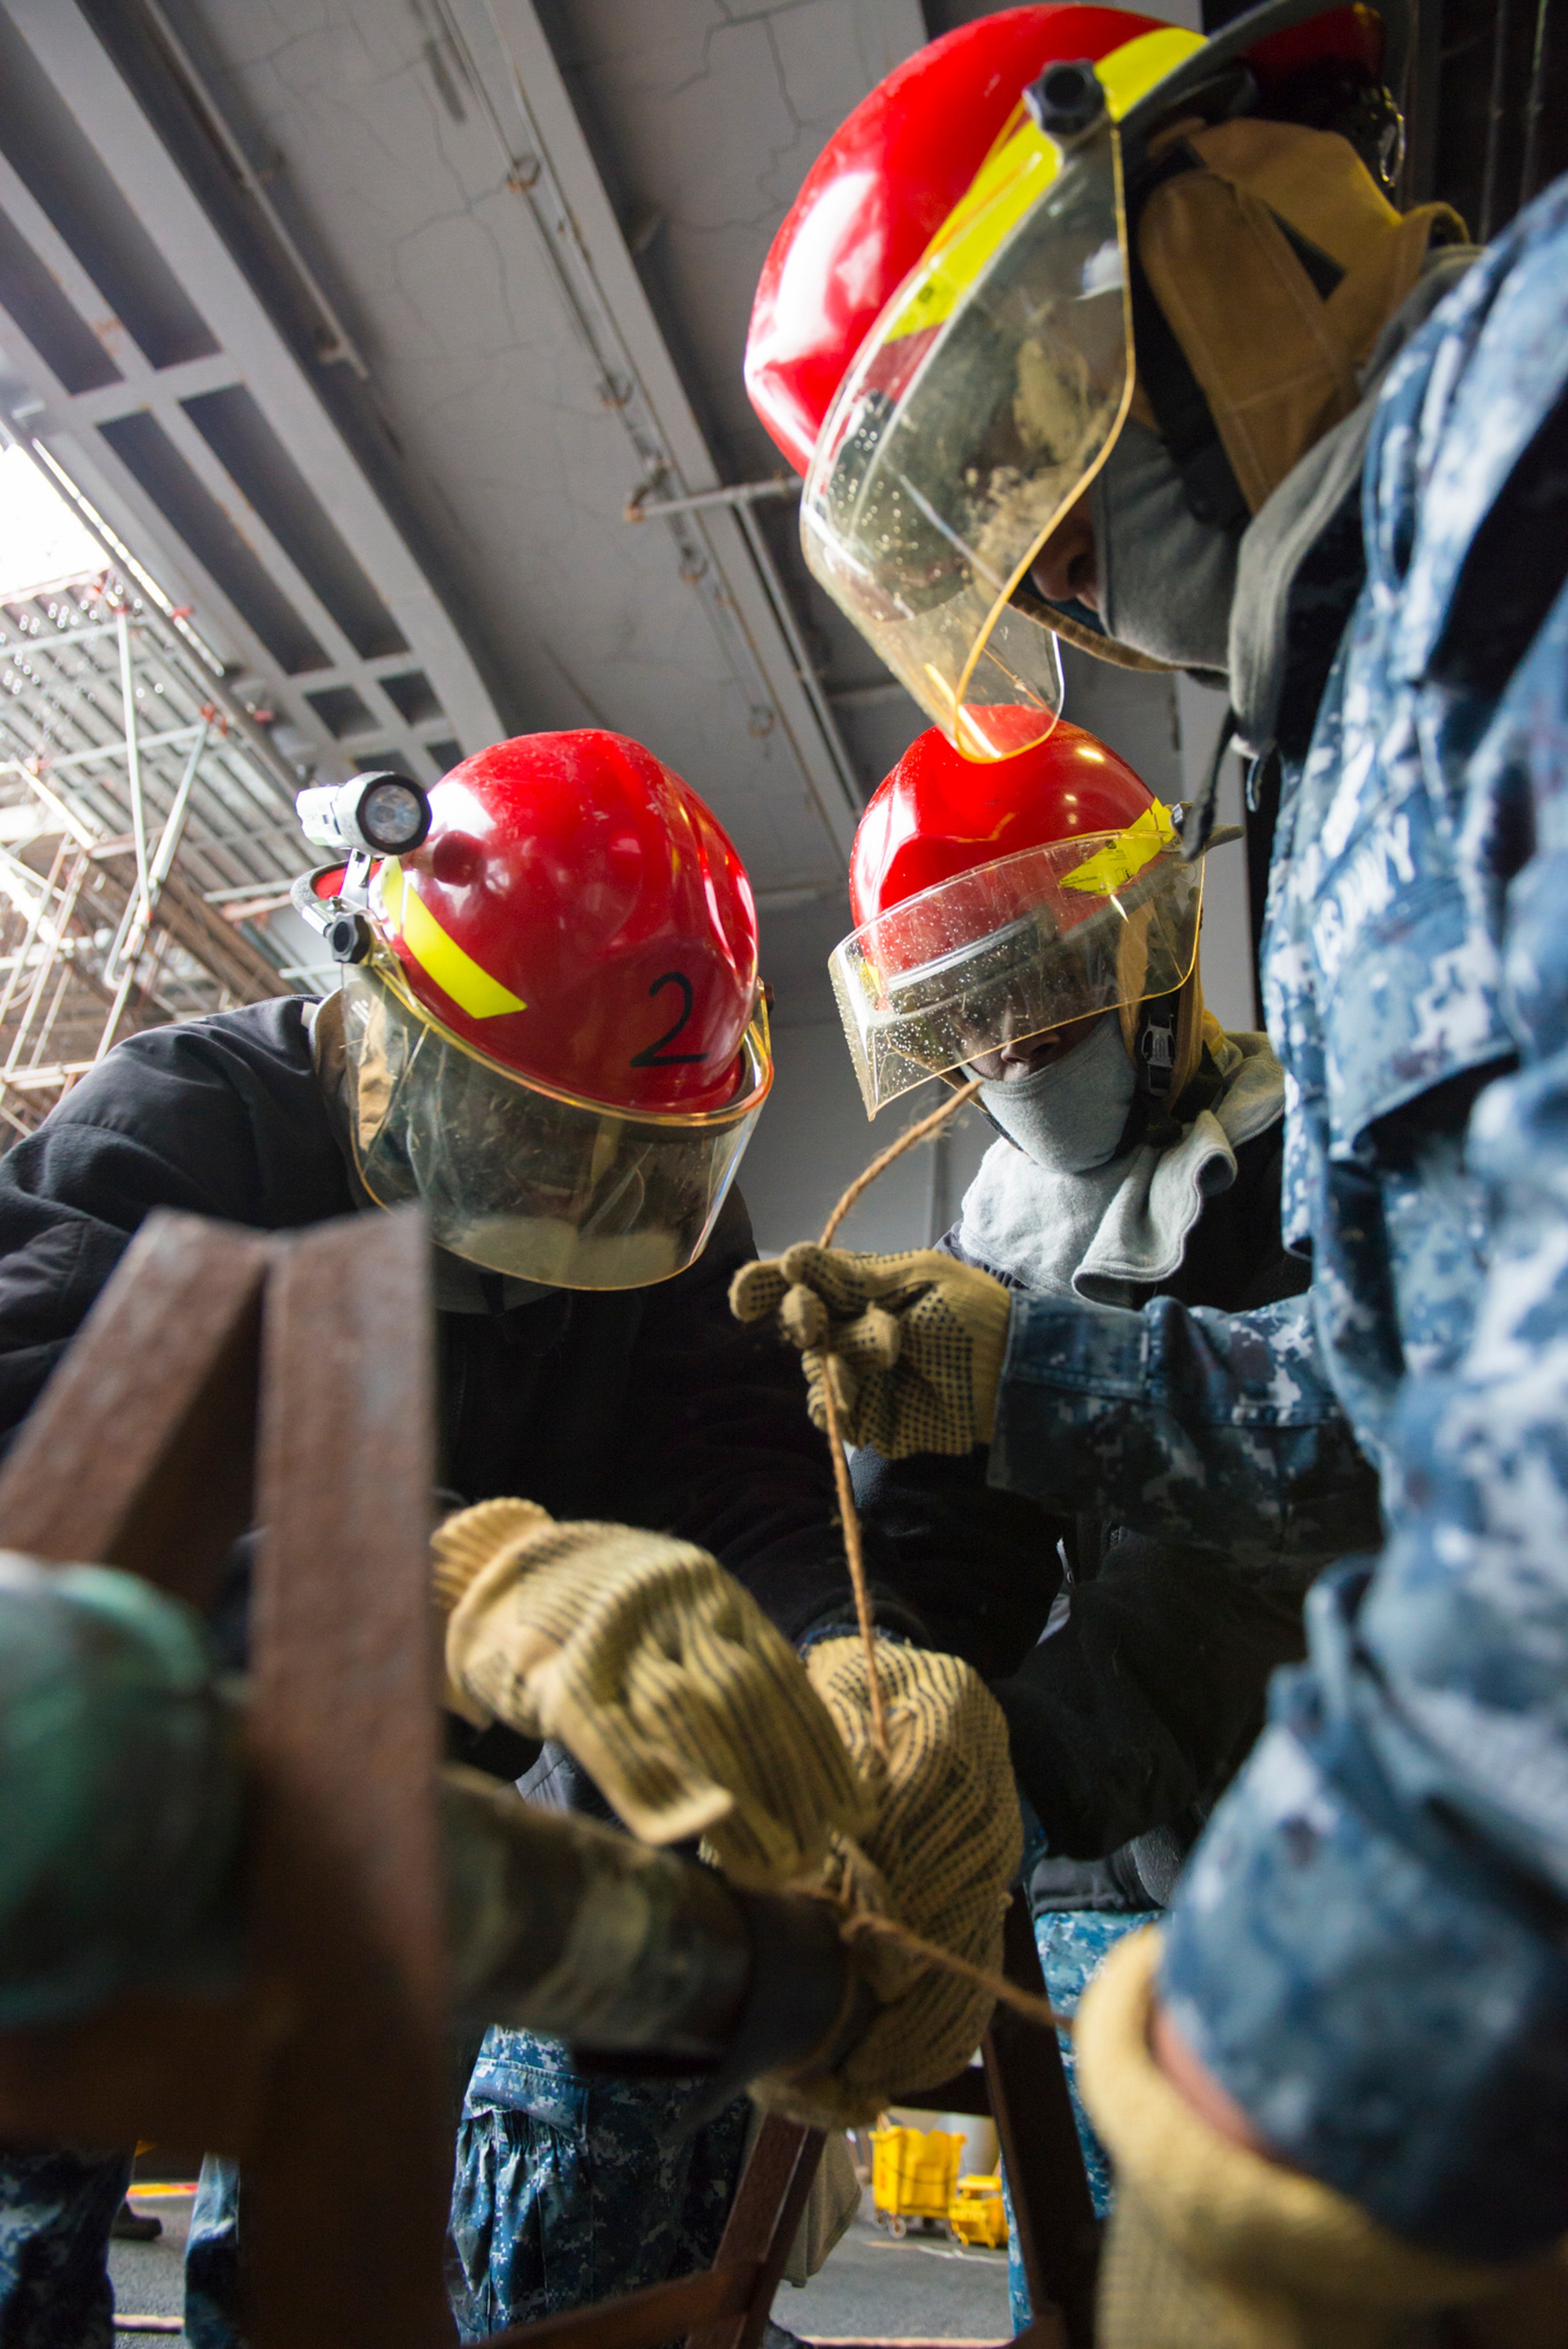 DVIDS - Images - Sailors Use Rope to Secure a Soft Patch to a Pipe